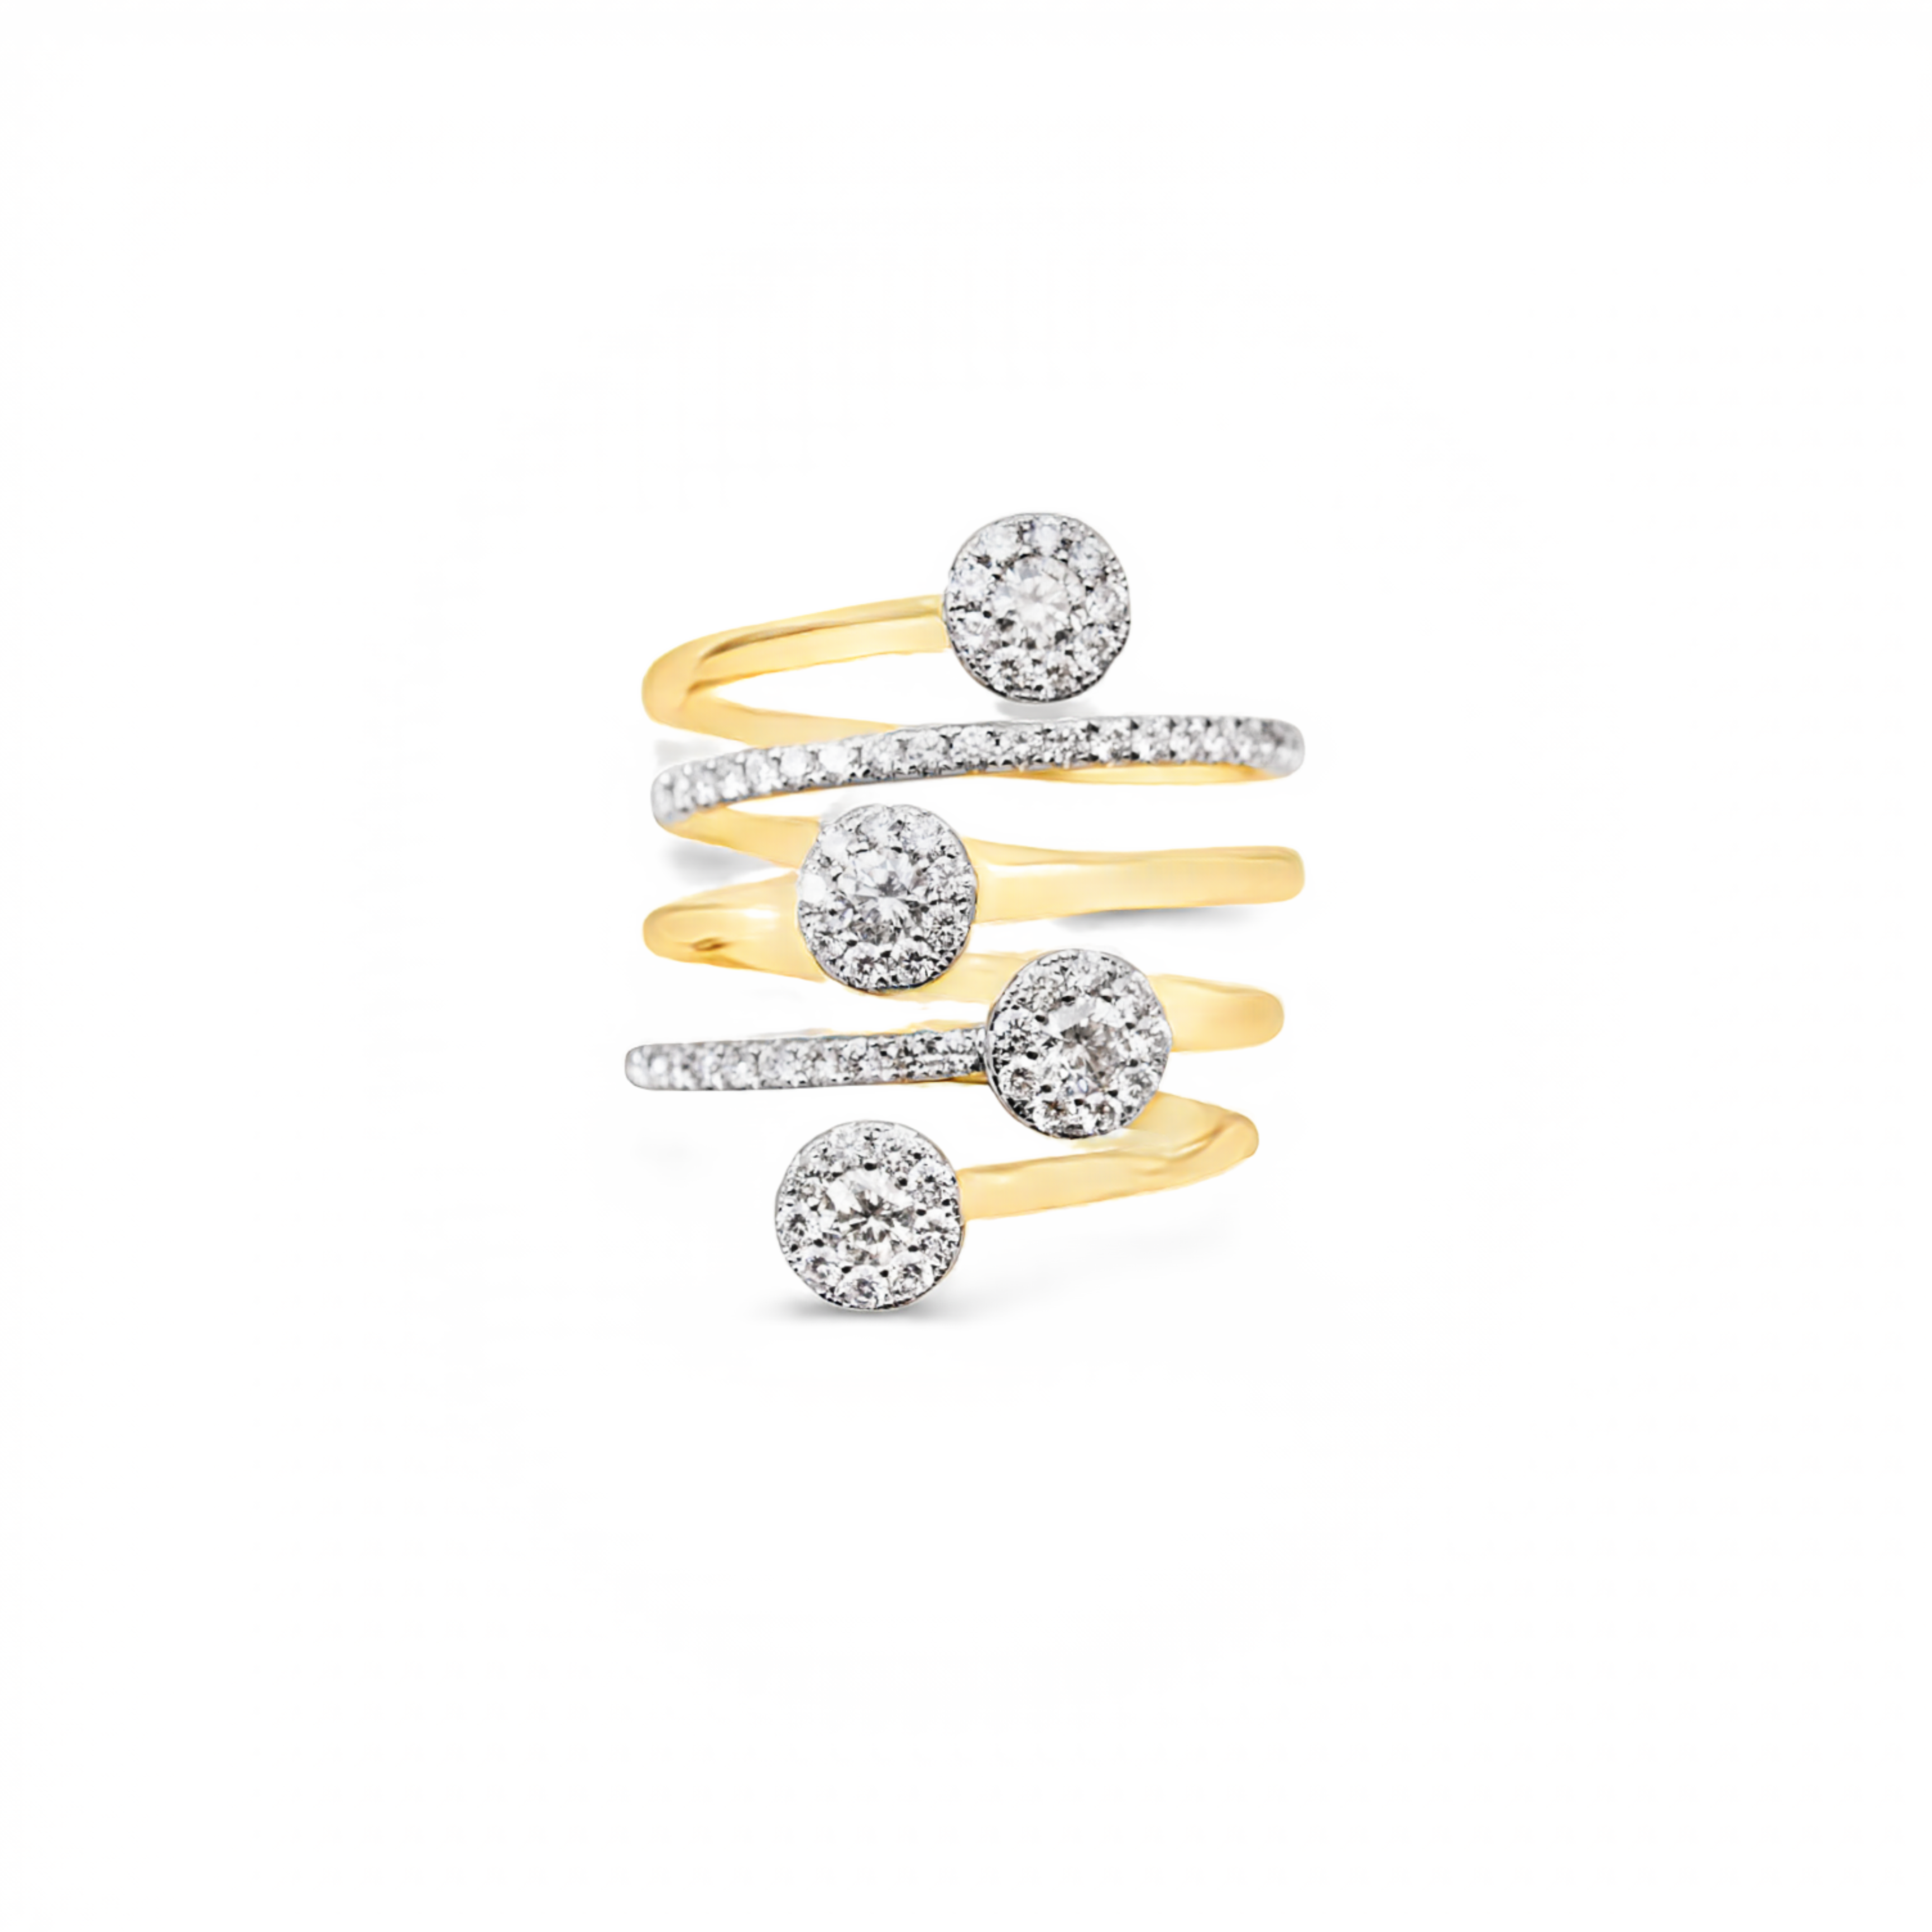 Crafted in 18k yellow gold, the 1.18 ct round diamonds boast F/G color and VS1 clarity. Wrapped in a five-row ring with a width of 25.00 mm, you'll turn heads in envy with this stylish and modern piece.